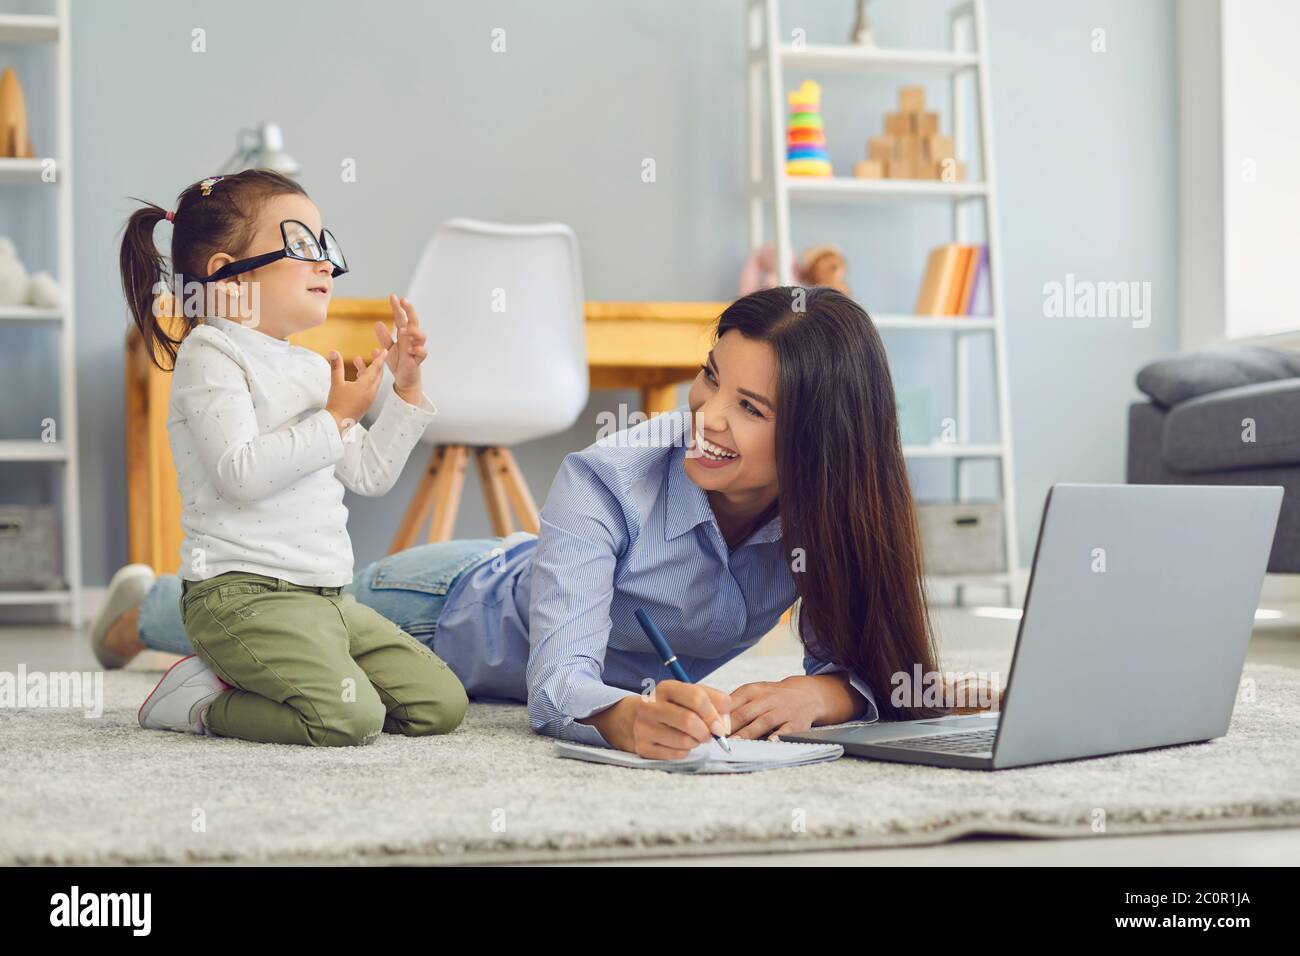 Young mother working or studying on laptop while her cute daughter playing silly games at home. Multitasking and life balance concept Stock Photo